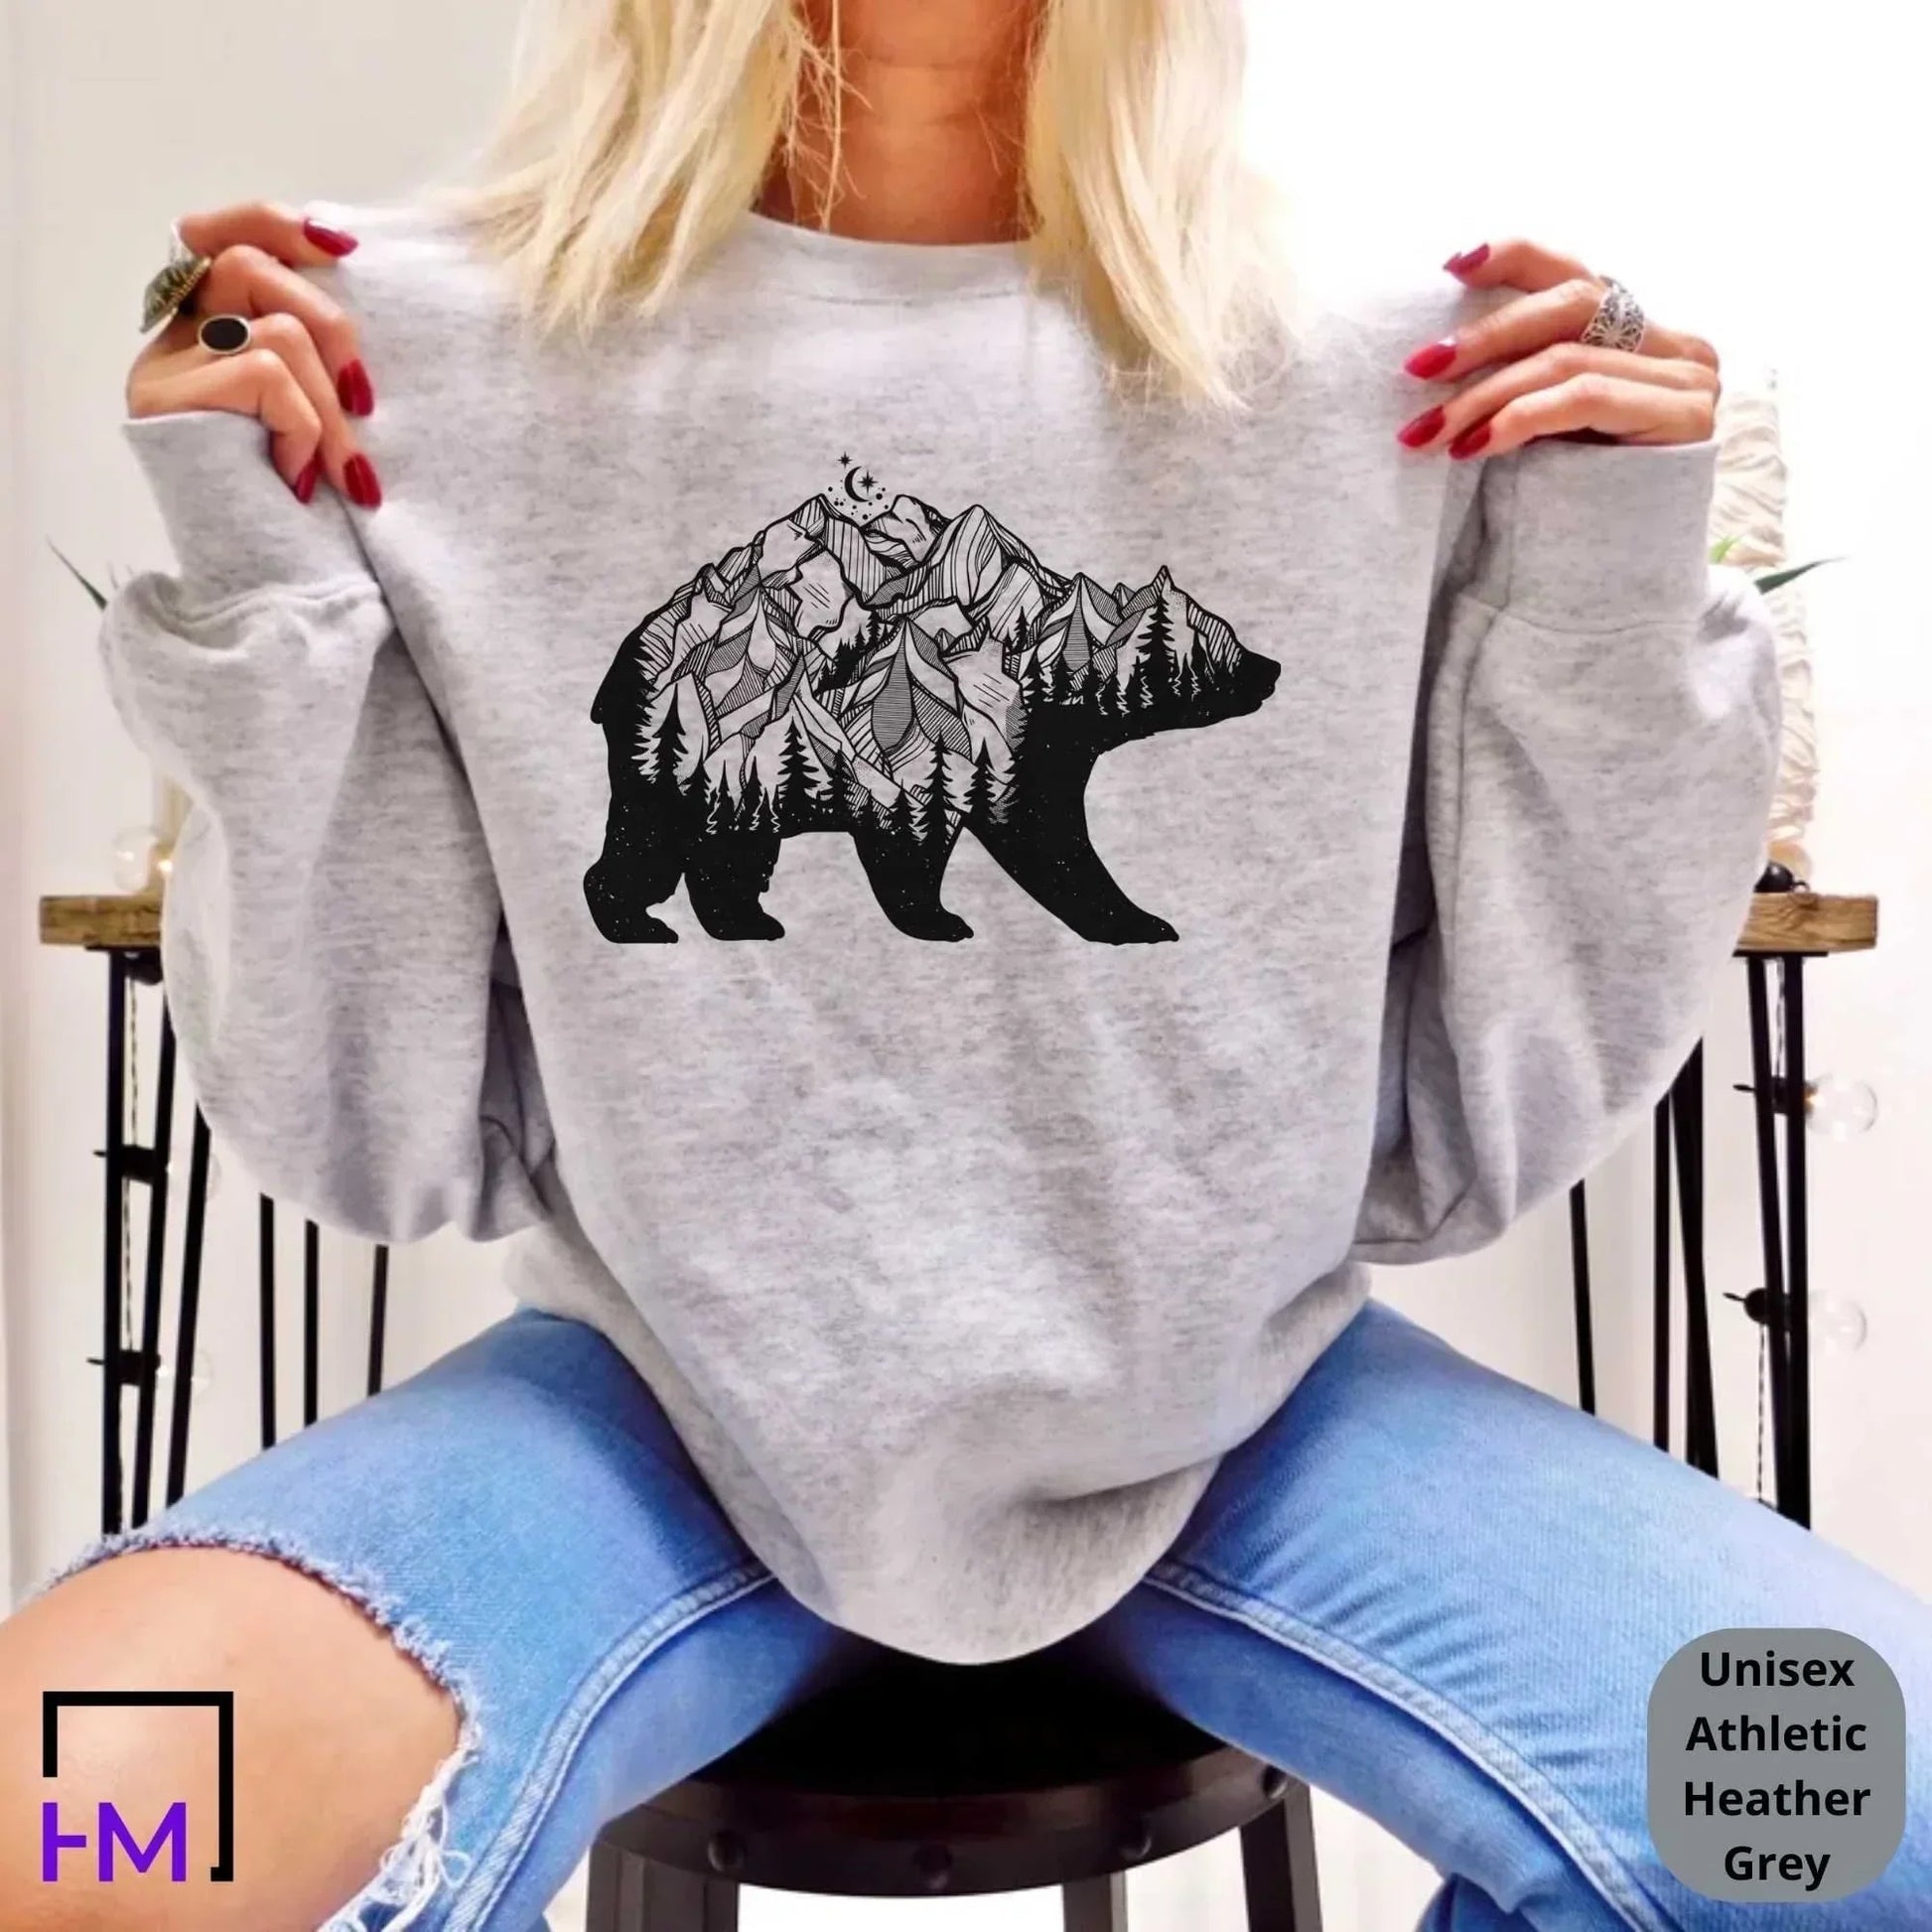 Camping Shirt, Happy Camper, Adventure Time is Calling Gift, Camper Gifts for Women, Nature Lover Sweatshirt, Camping Presents, Hiking Tee HMDesignStudioUS